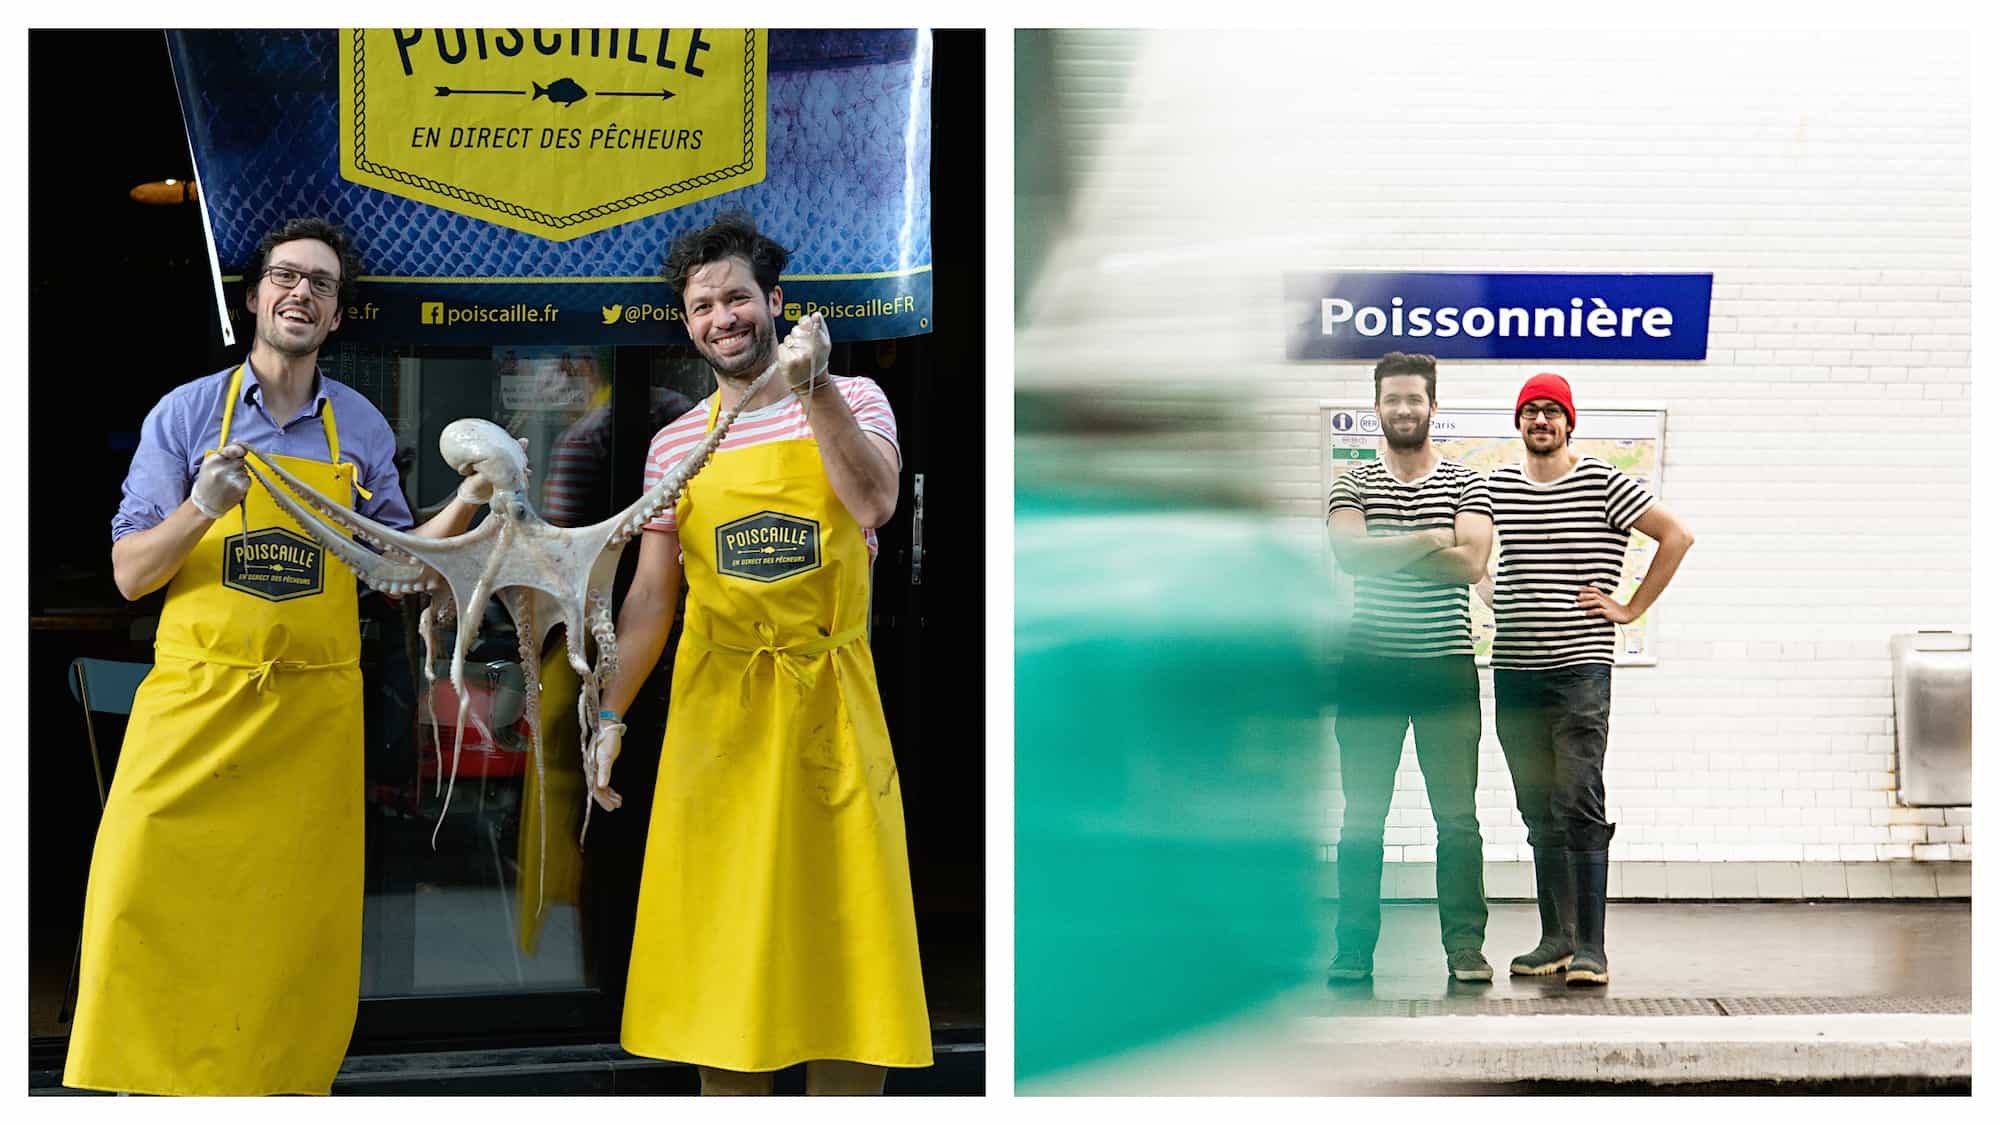 The founders of Poiscaille ethical seafood startup in France with an octopus (left). The Poiscaille Paris ethical fish startup at Poissonnière metro station in Paris, wearing matching stripy mariner t-shirts (right).